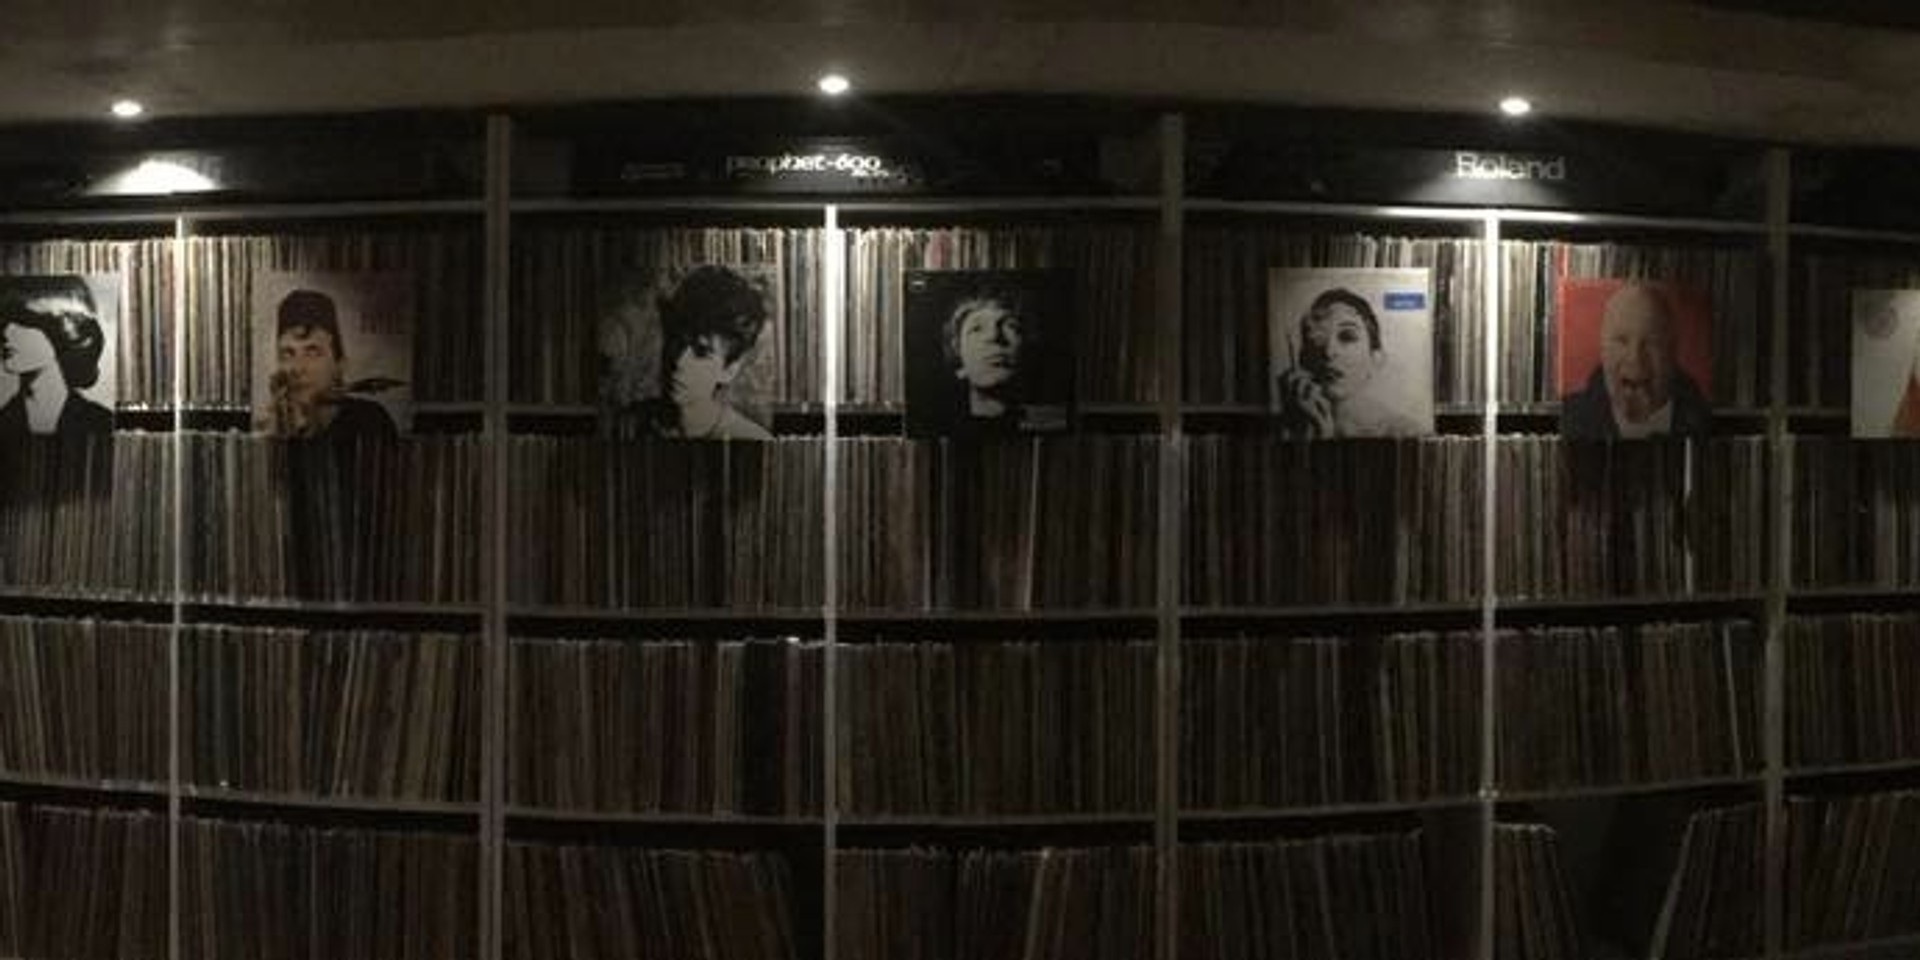 A record store for the discerning record collector, Thisispop! opens today